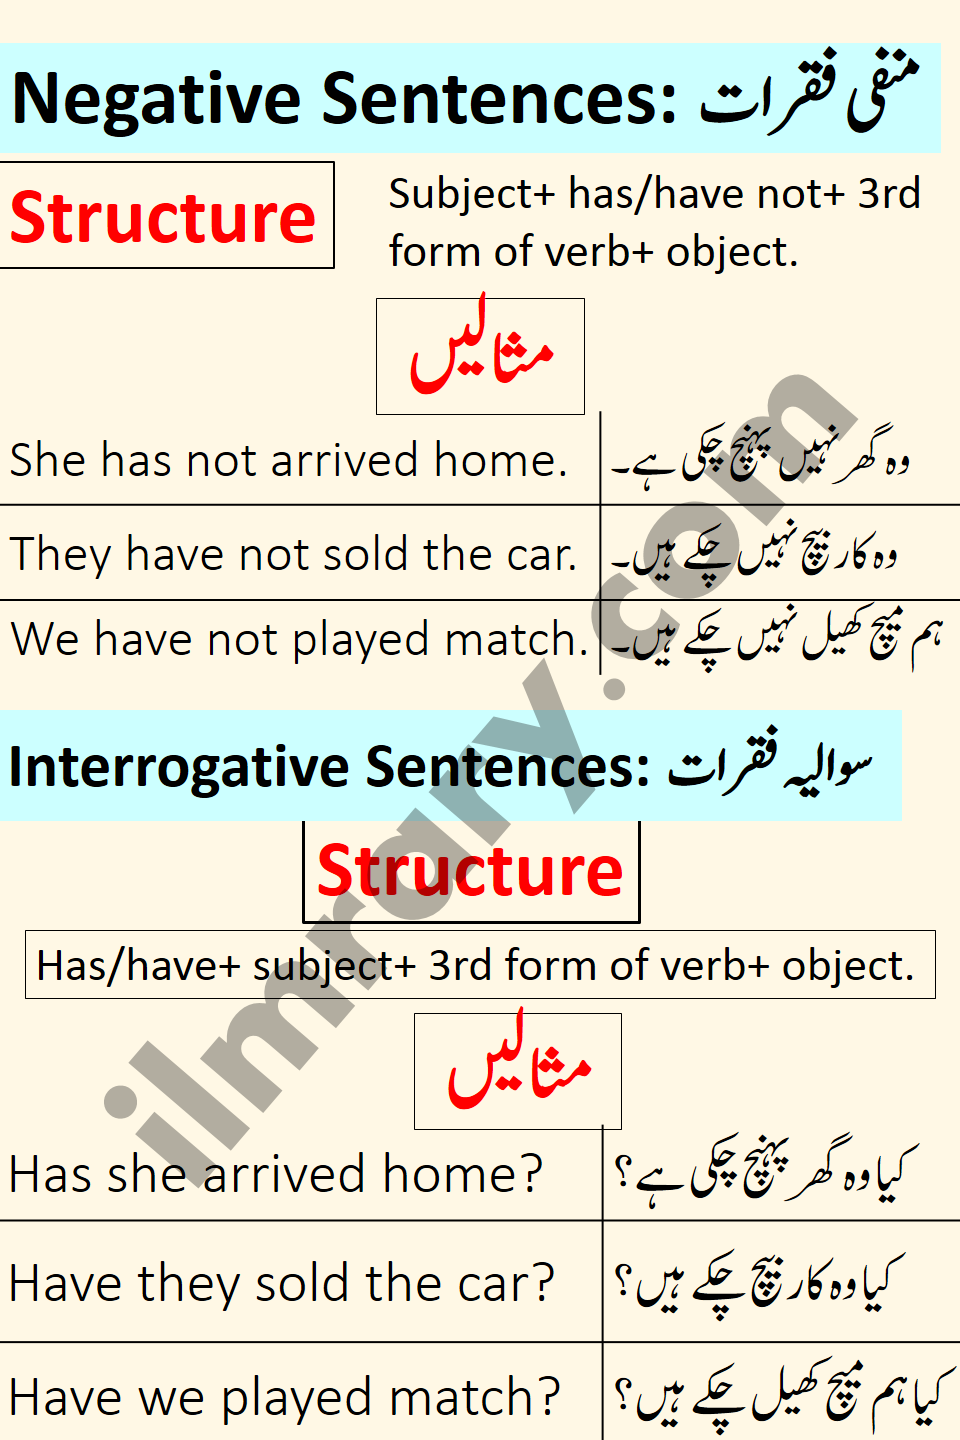 Interrogative and Negative Examples for Present Perfect Tense in Urdu